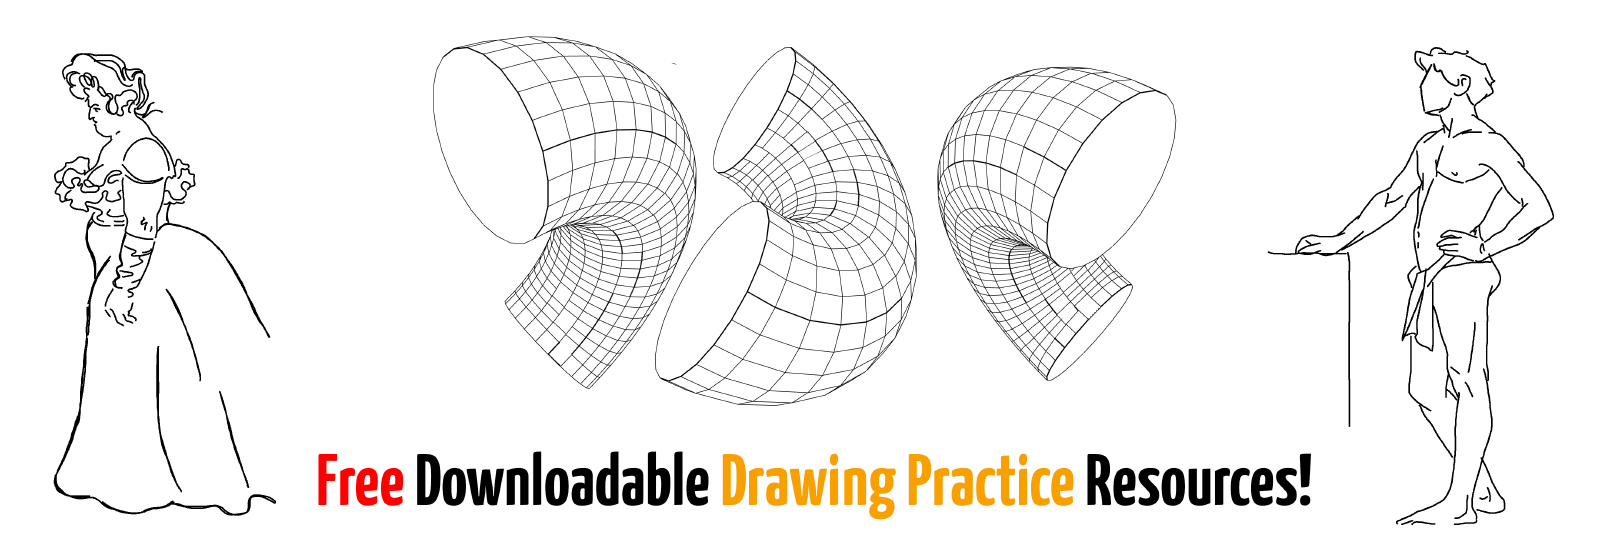 link to a web page that presents a downloadable zip file with most drawing practice resources on this website